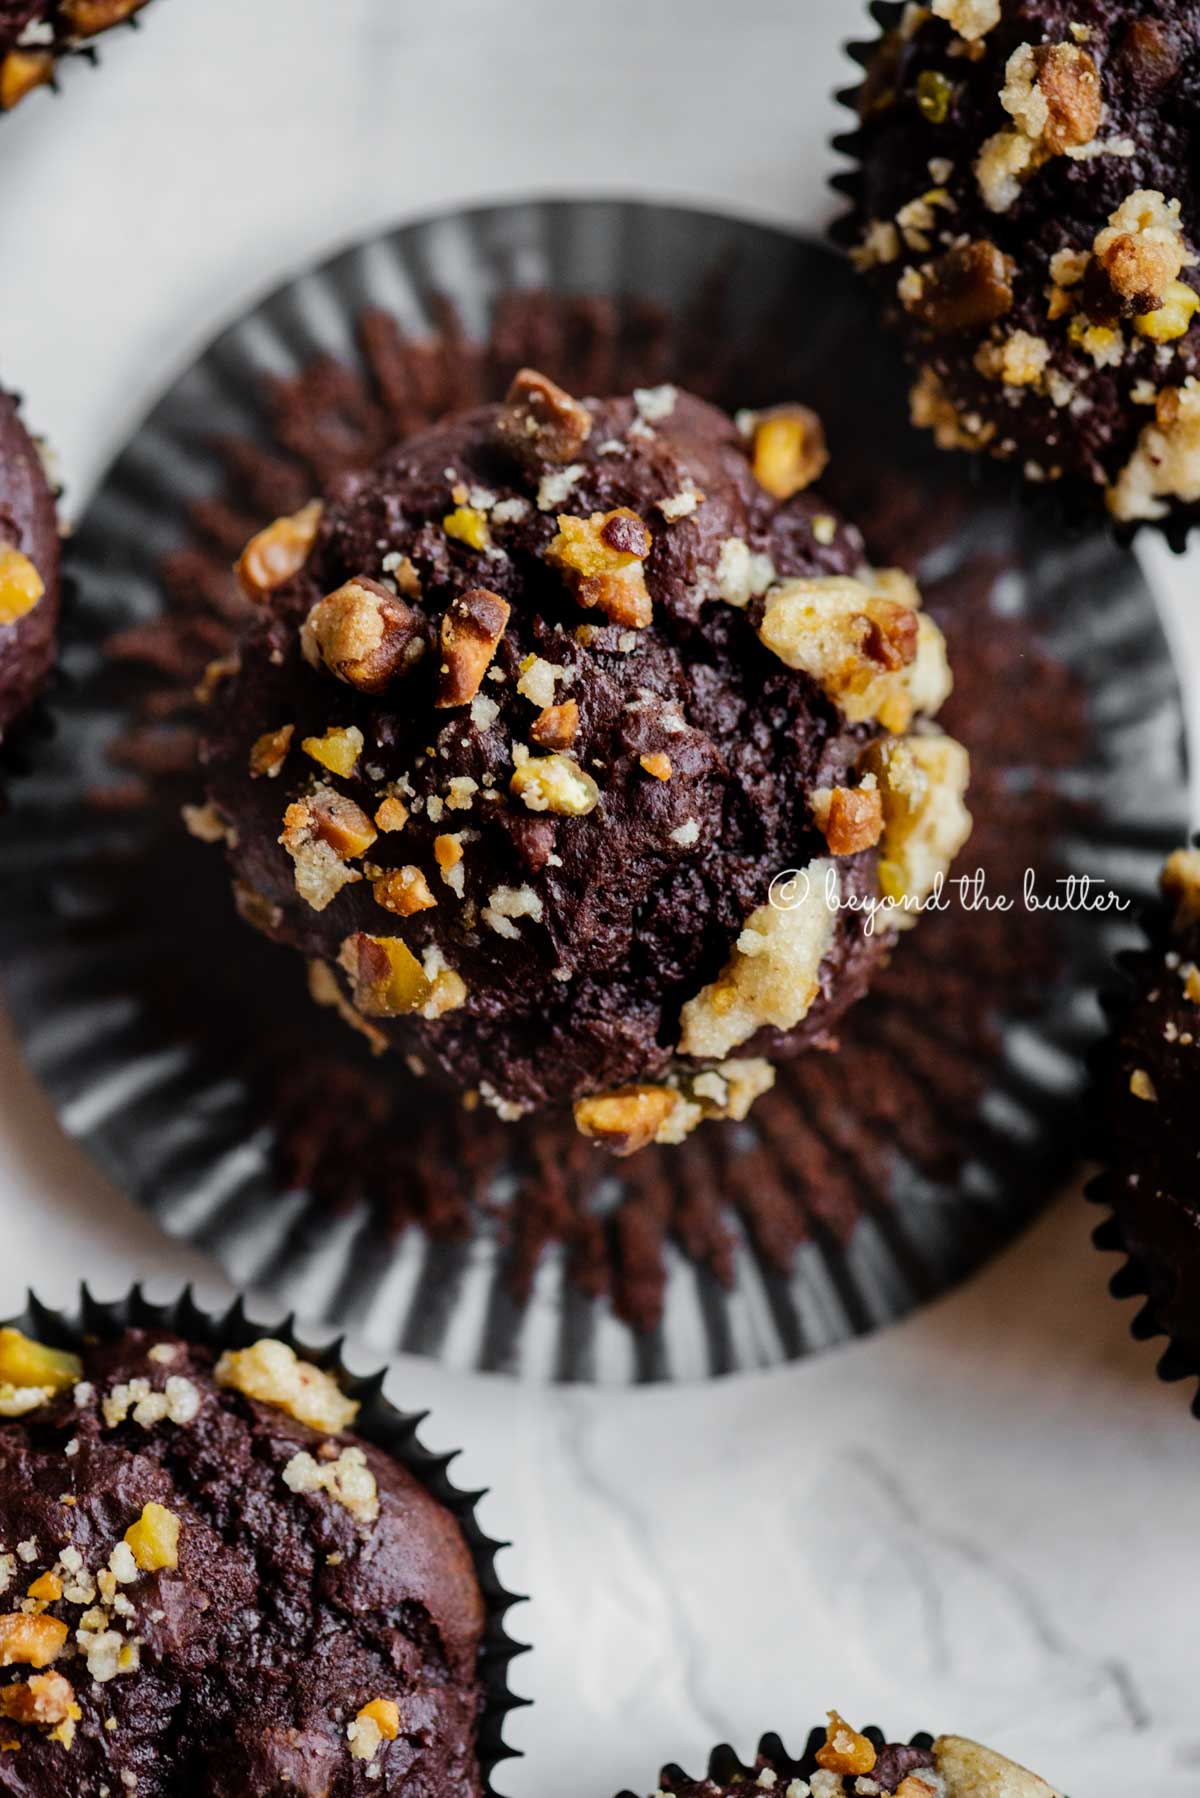 Dark chocolate pistachio cream cheese muffins with center muffin unwrapped | All Images © Beyond the Butter™